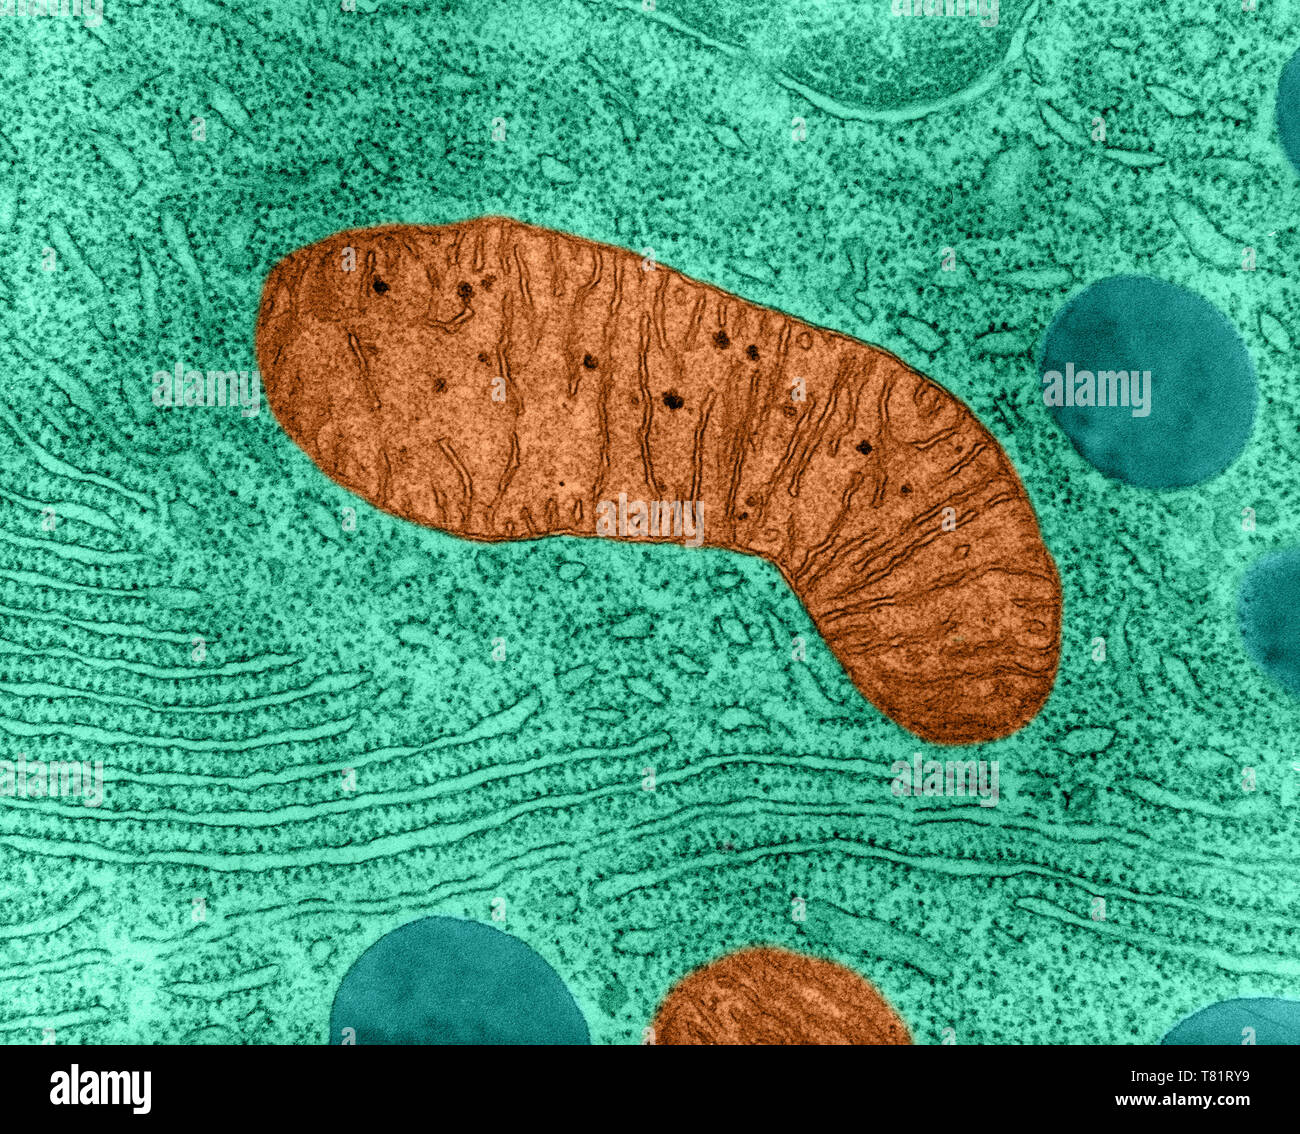 Mitochondrion in Bat Pancreas Cell, TEM Stock Photo